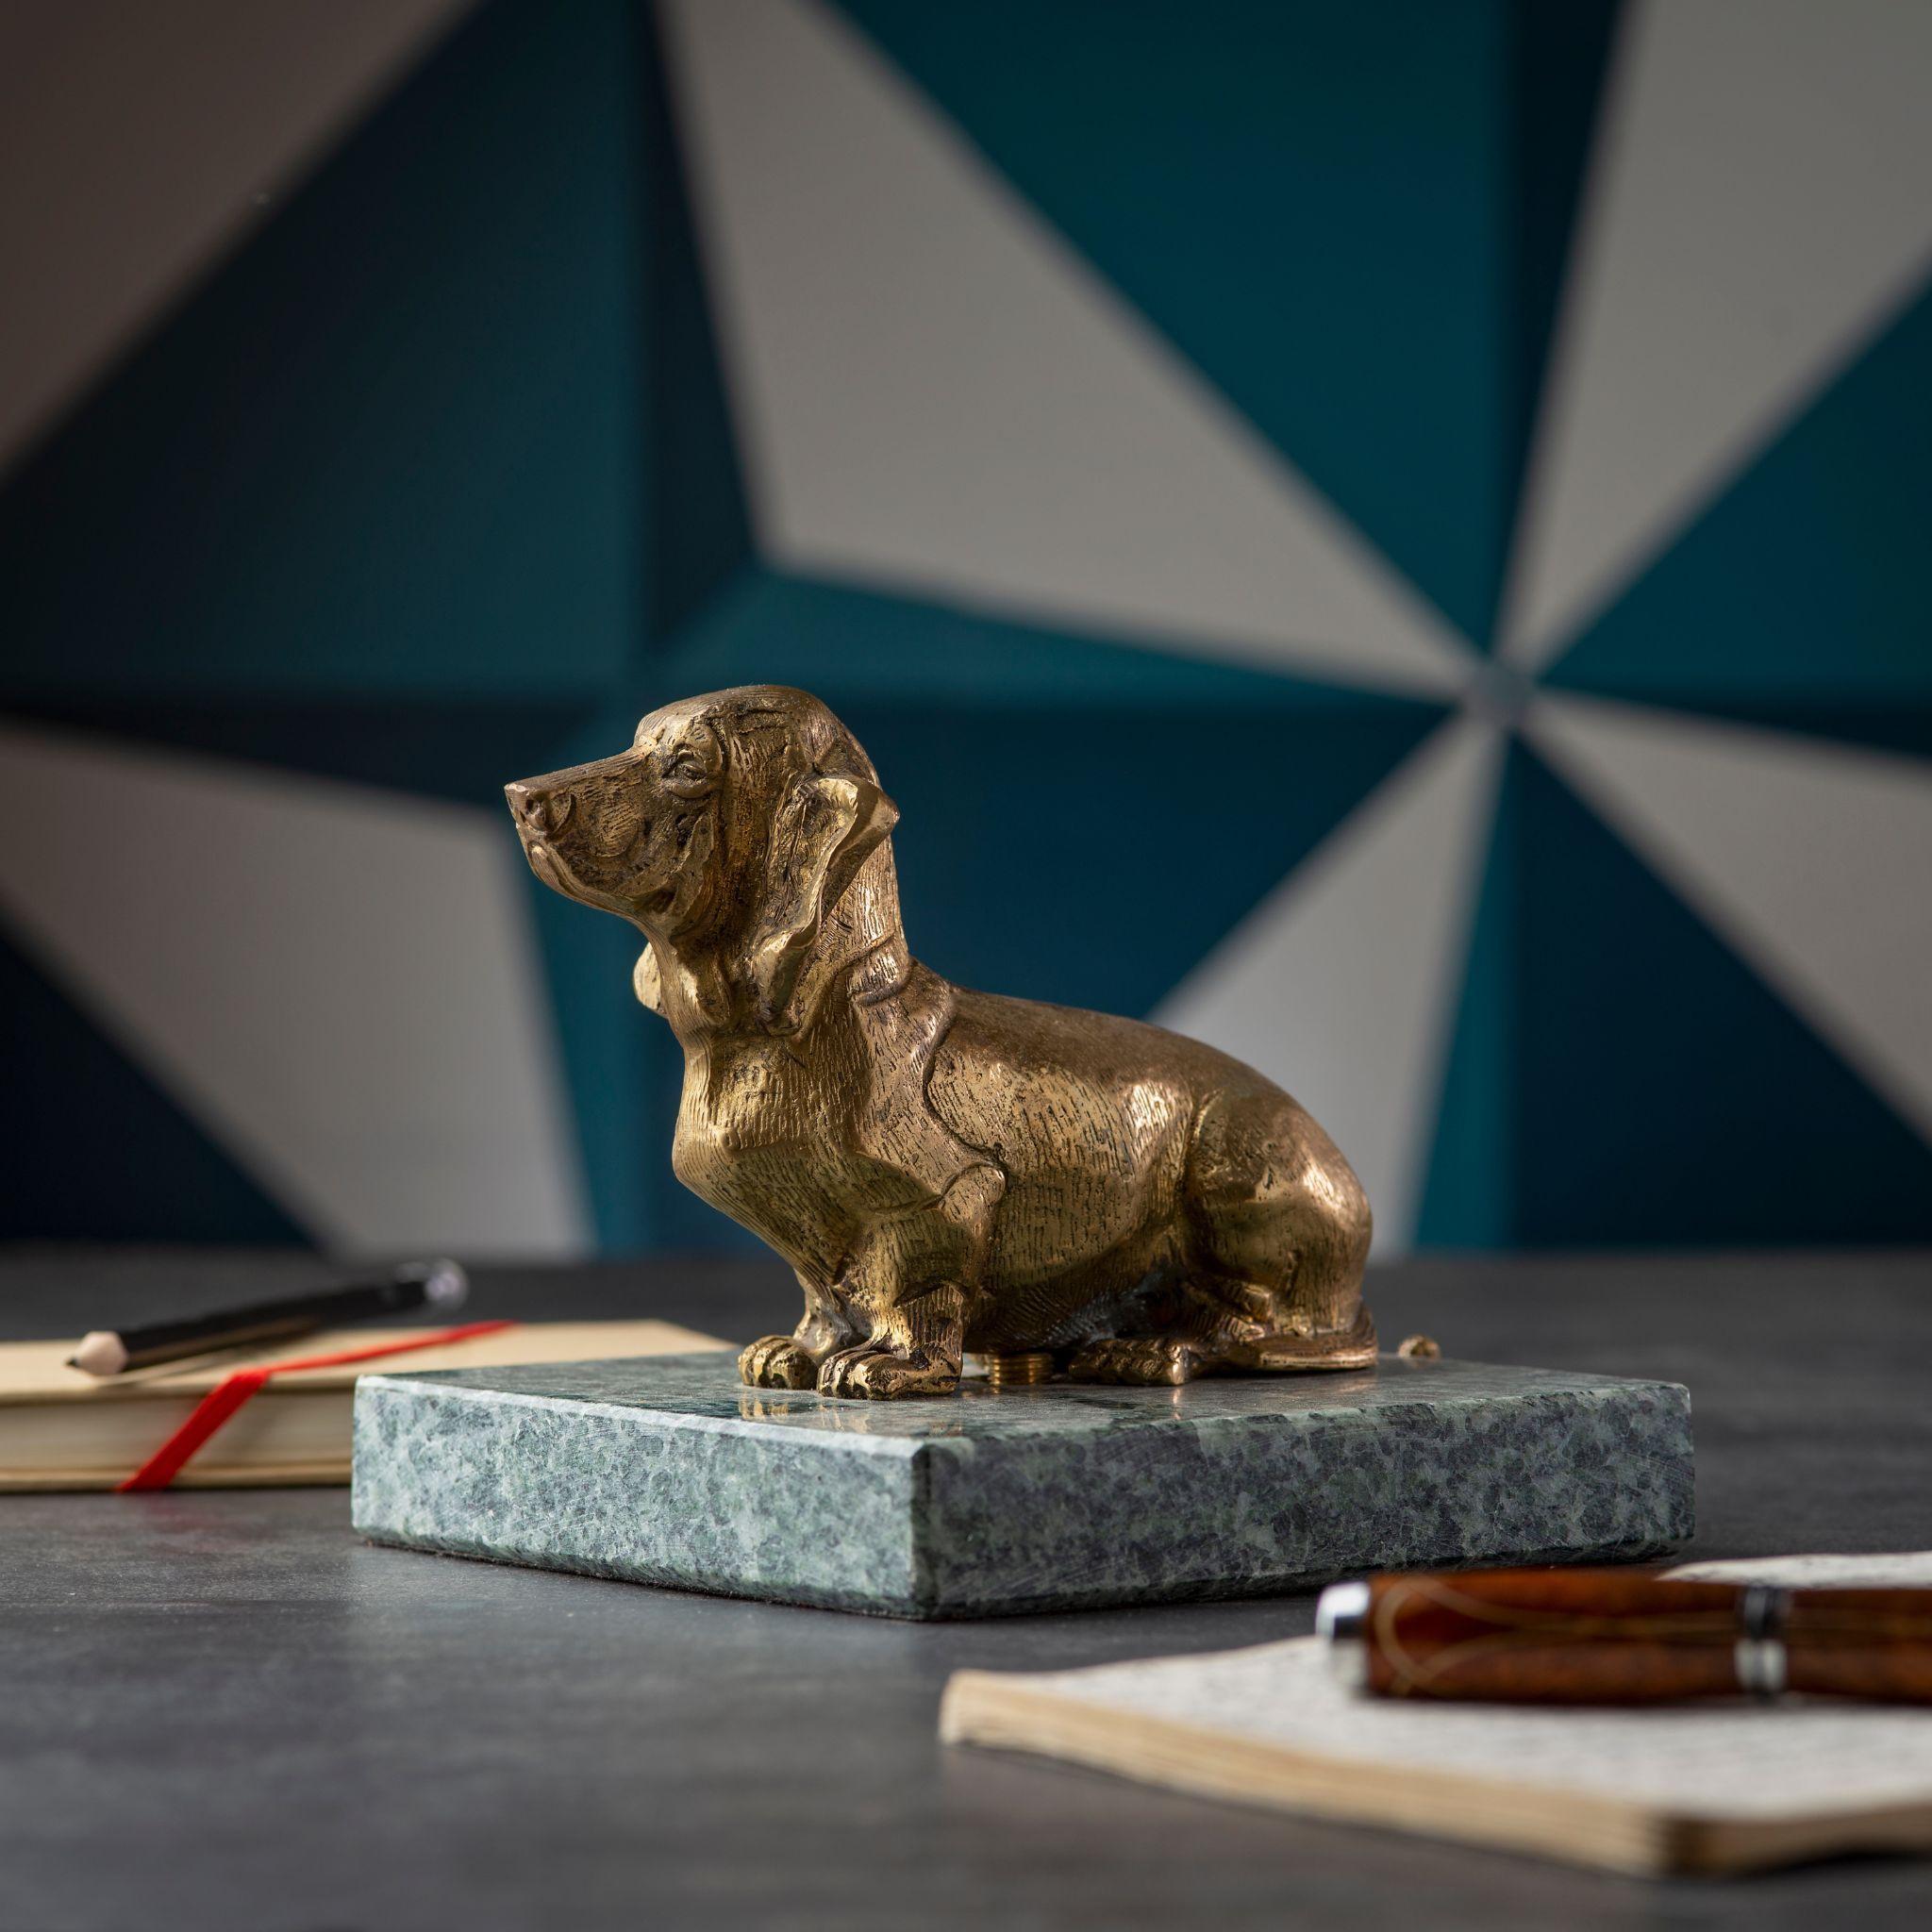 Discover our stunning brass basset with green marble base, a unique and elegant addition to any home. Expertly crafted from high-quality materials, this piece is both durable and beautiful. Its striking design and intricate details make it a